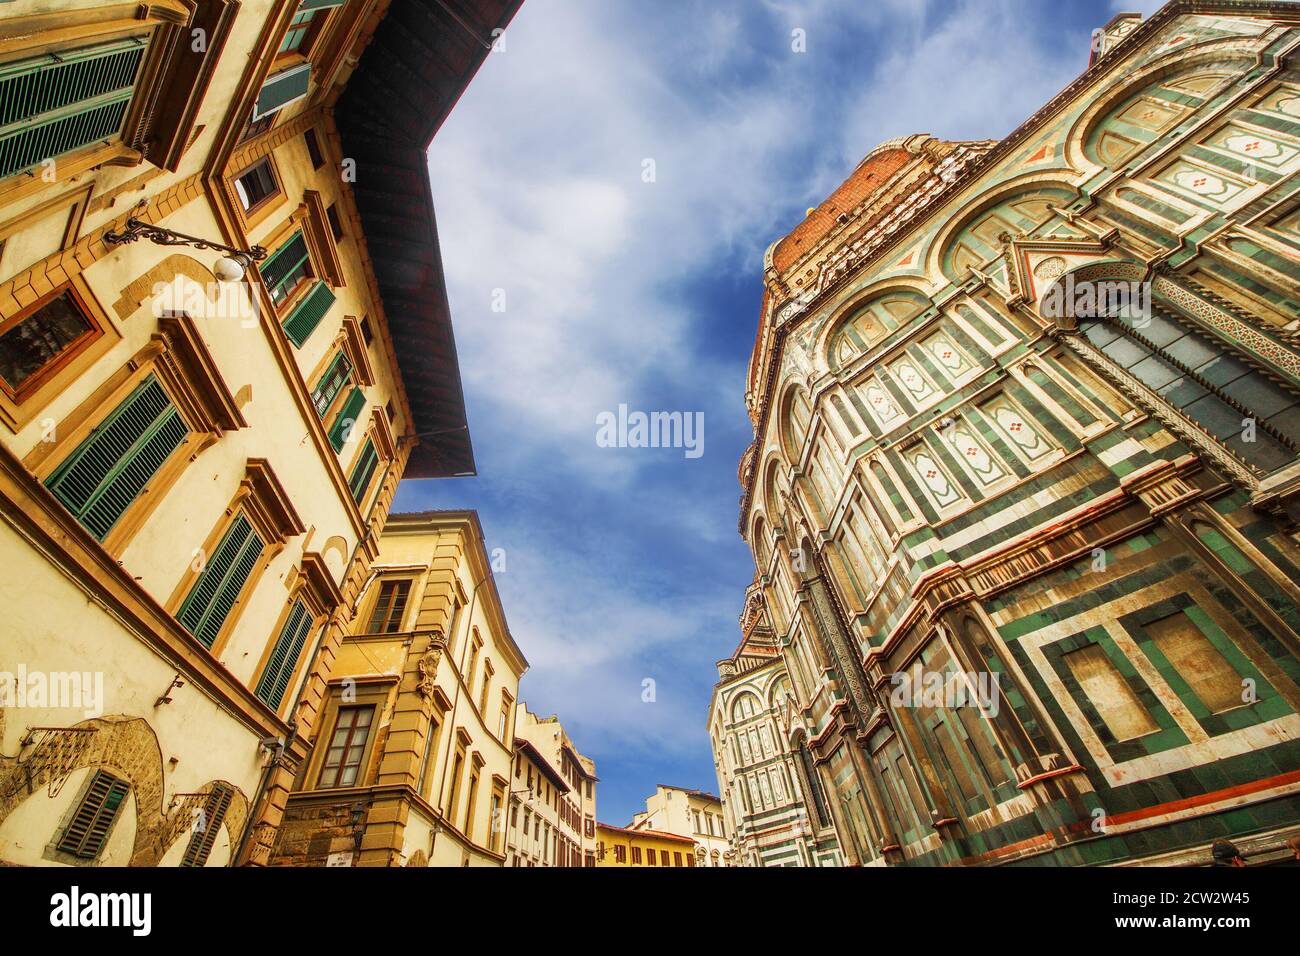 The Basilica di Santa Maria del Fiore (Basilica of Saint Mary of the Flower) and the surrounding architecture, Florence, Italy Stock Photo